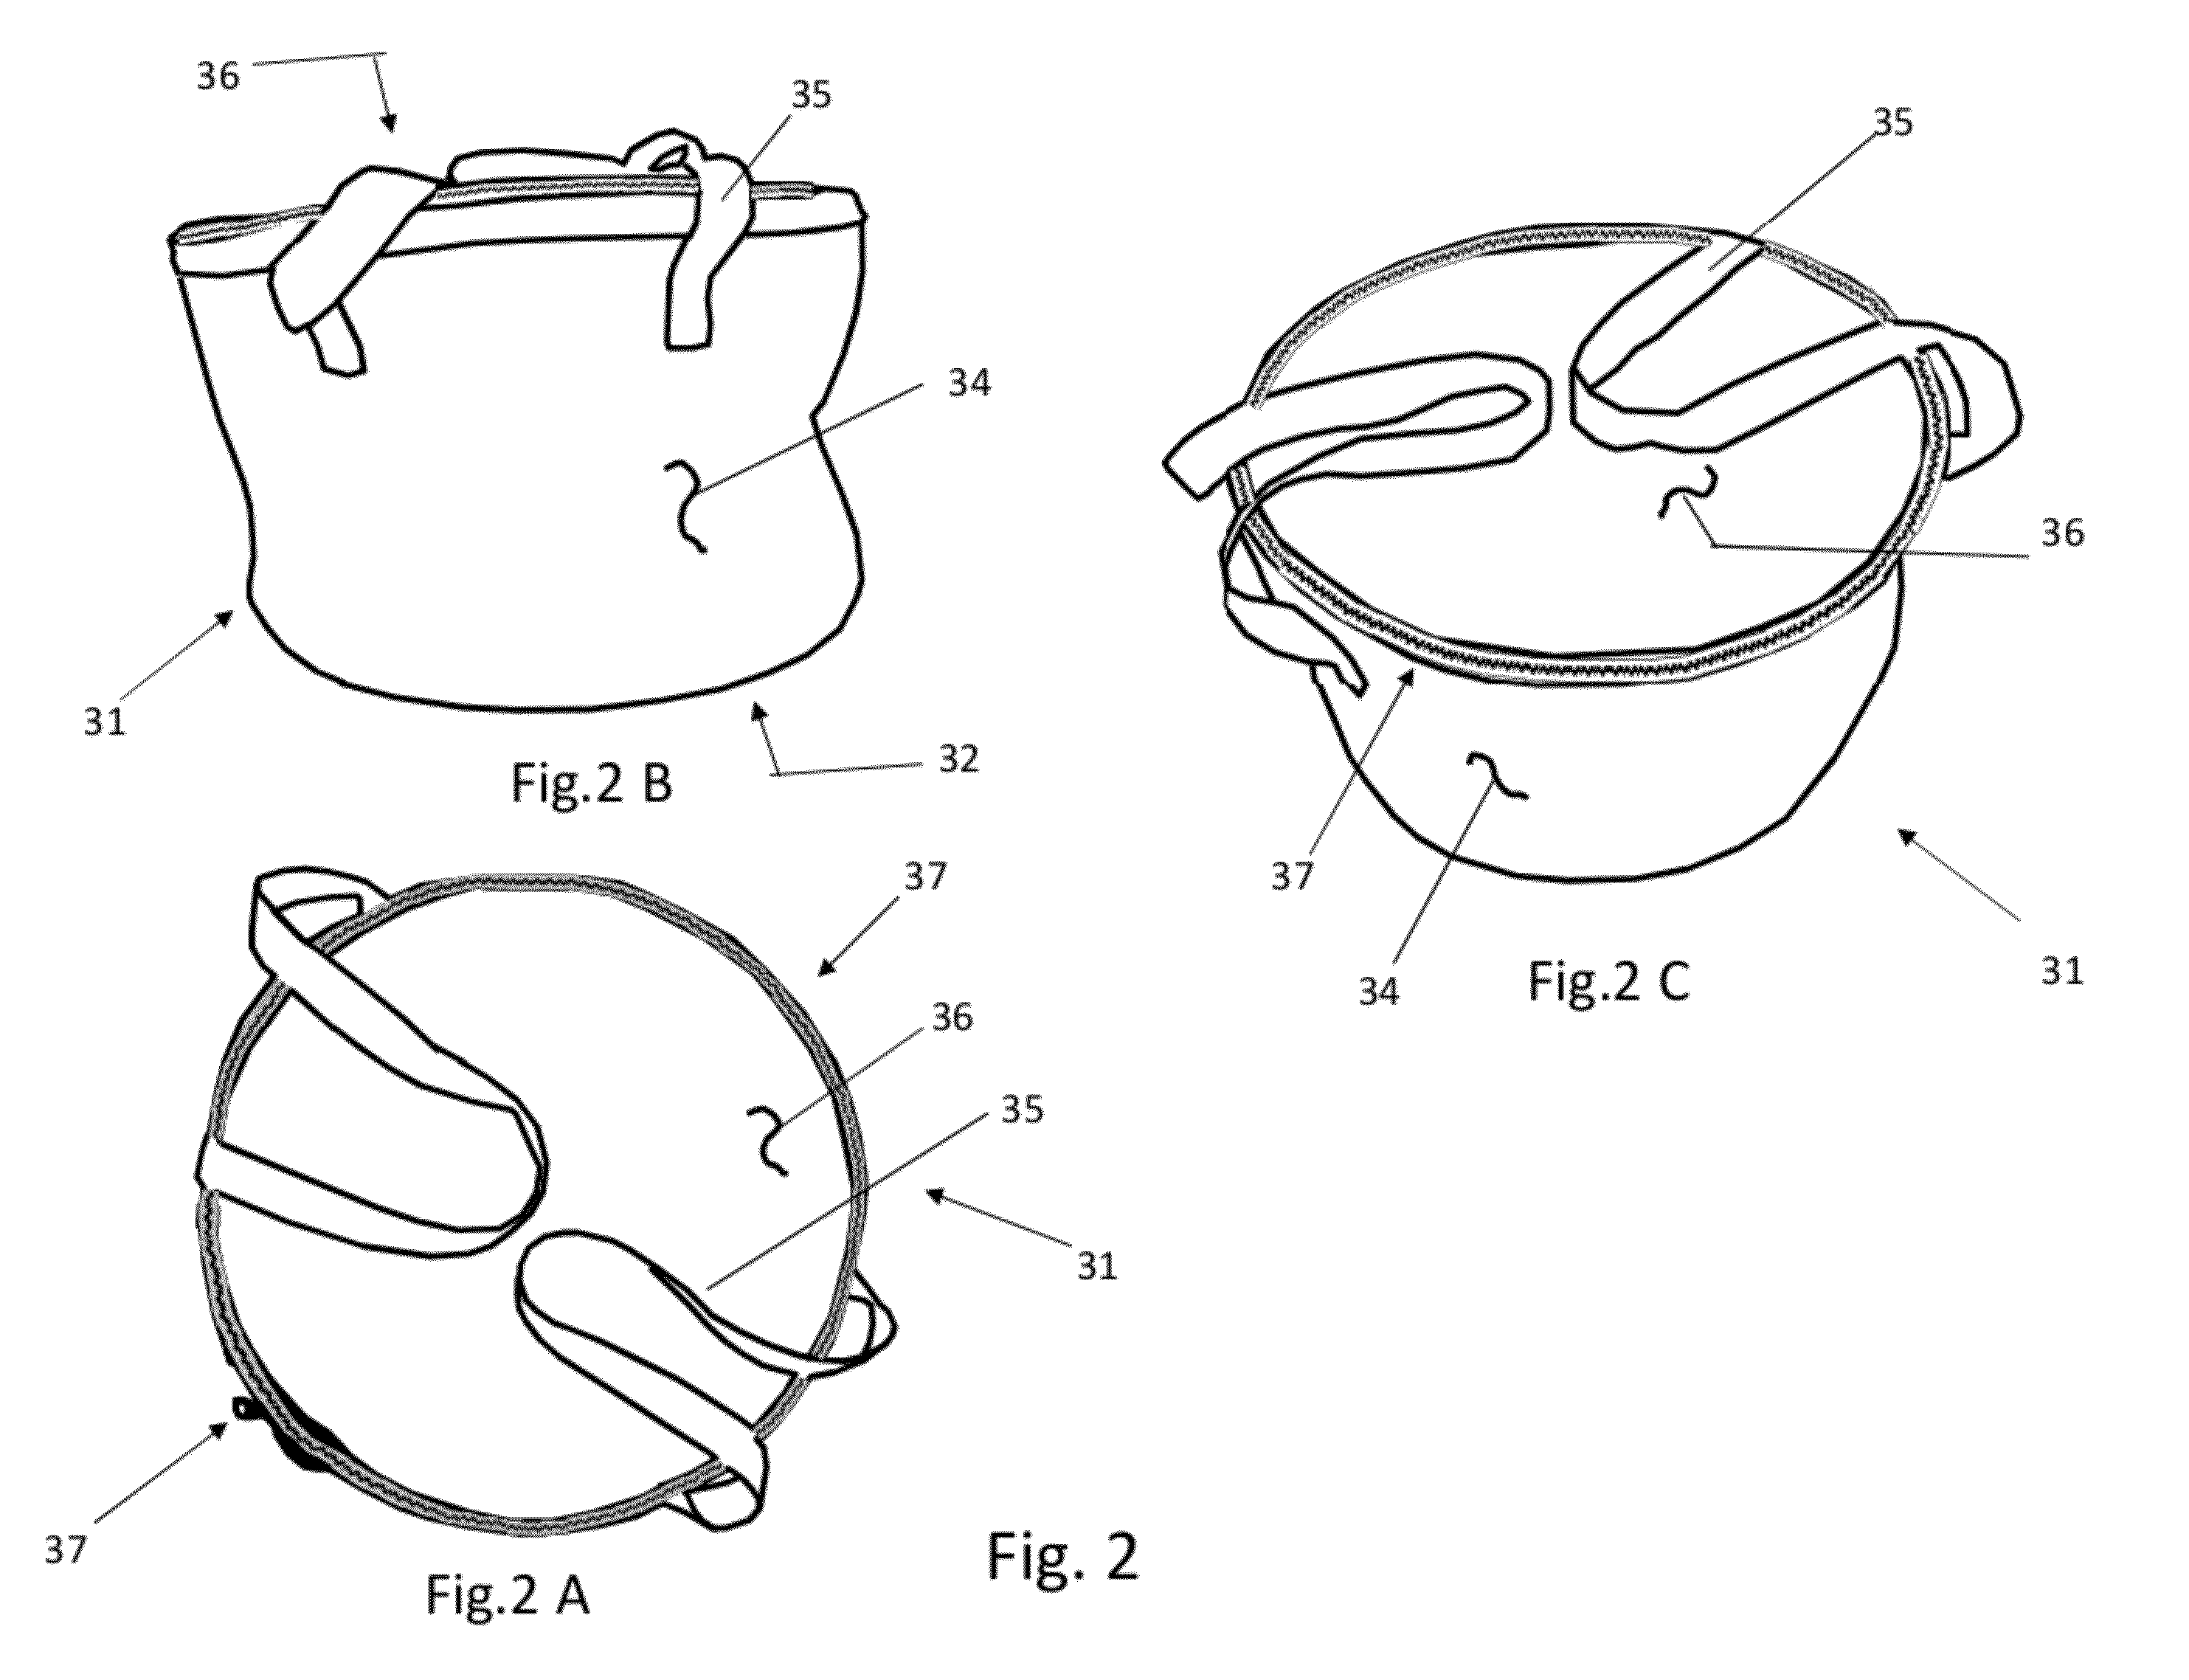 Insulated Food Carrying Device called The Bowl Buddy